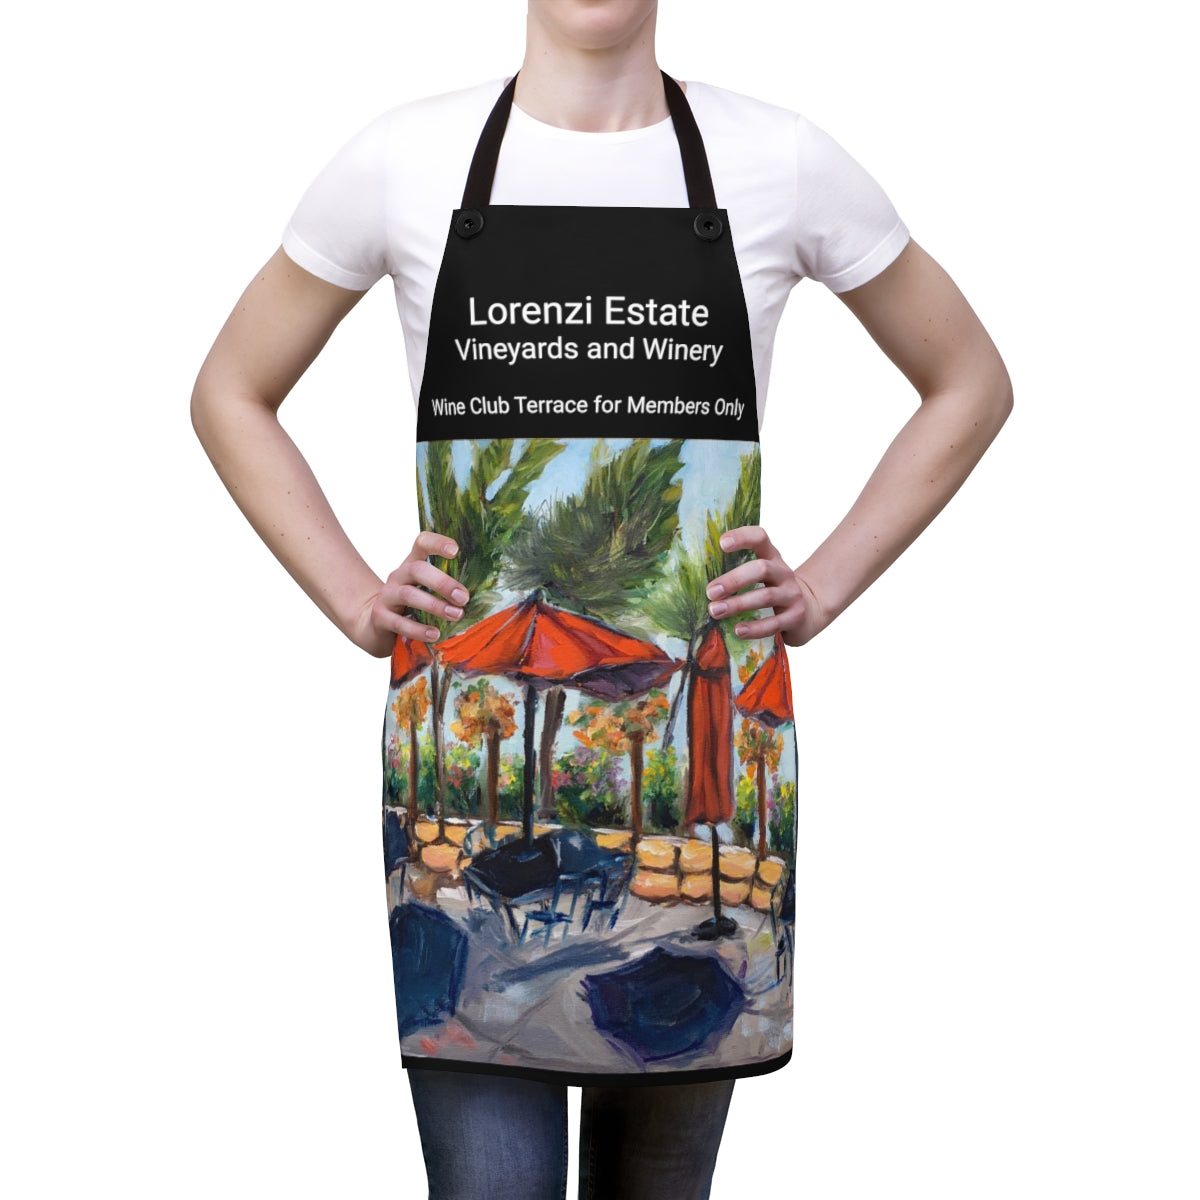 Lorenzi Estate Vineyards and Winery Painting of the Members Only Wine Club Terrace  Printed on Black Apron